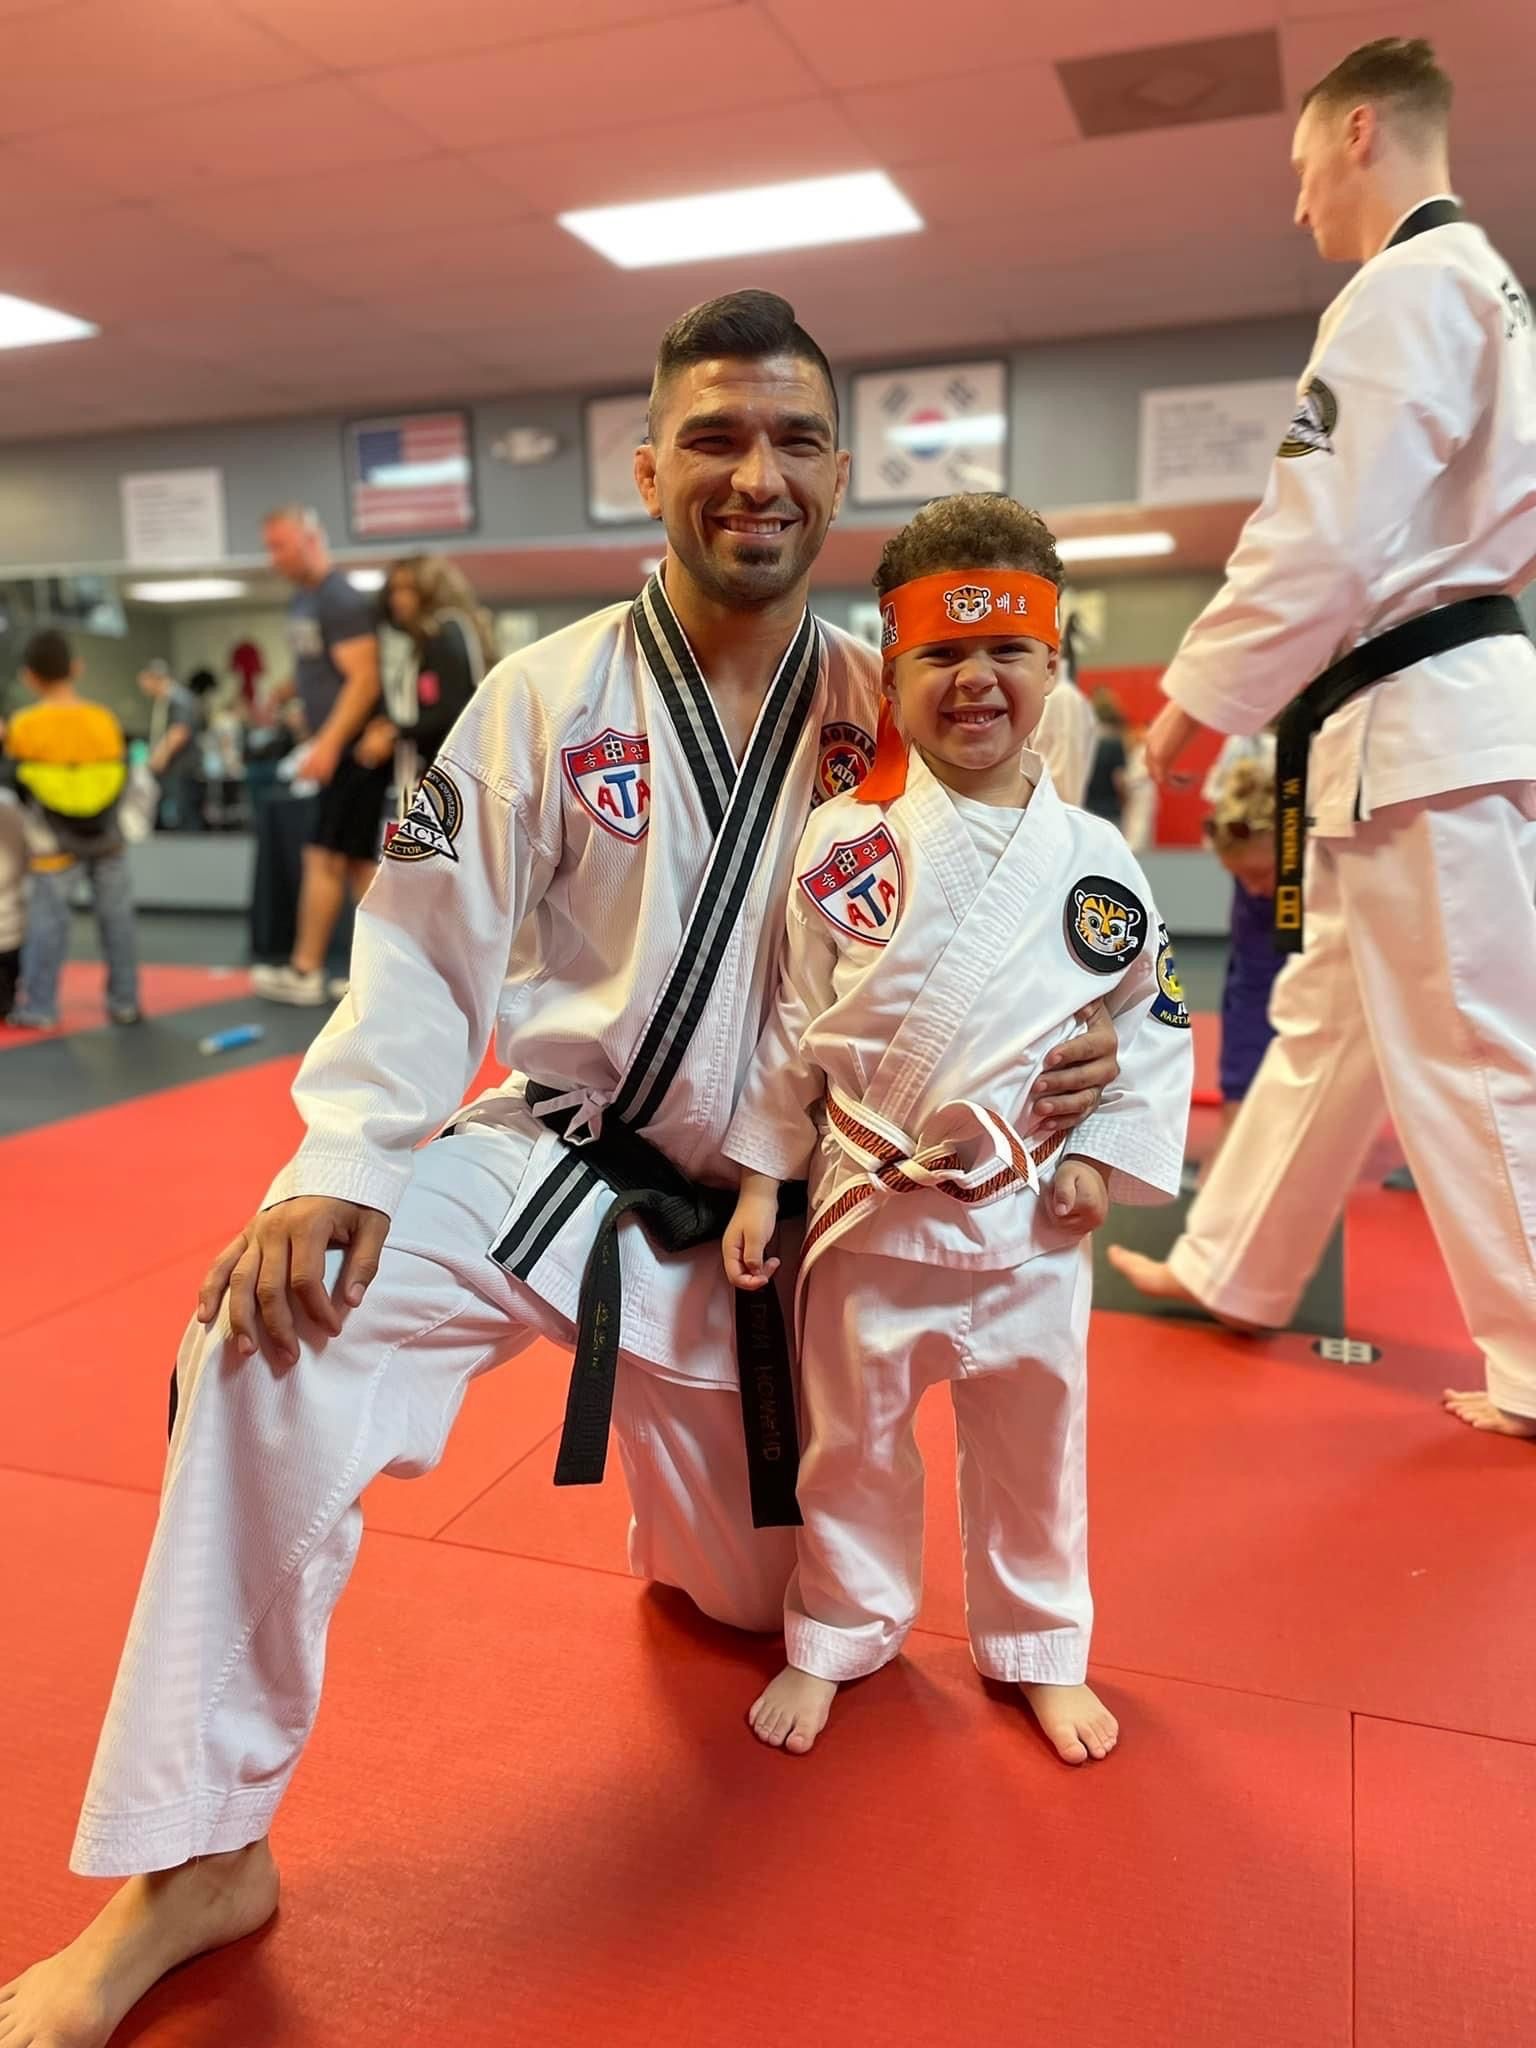 A man and a little boy are posing for a picture in a martial arts gym.